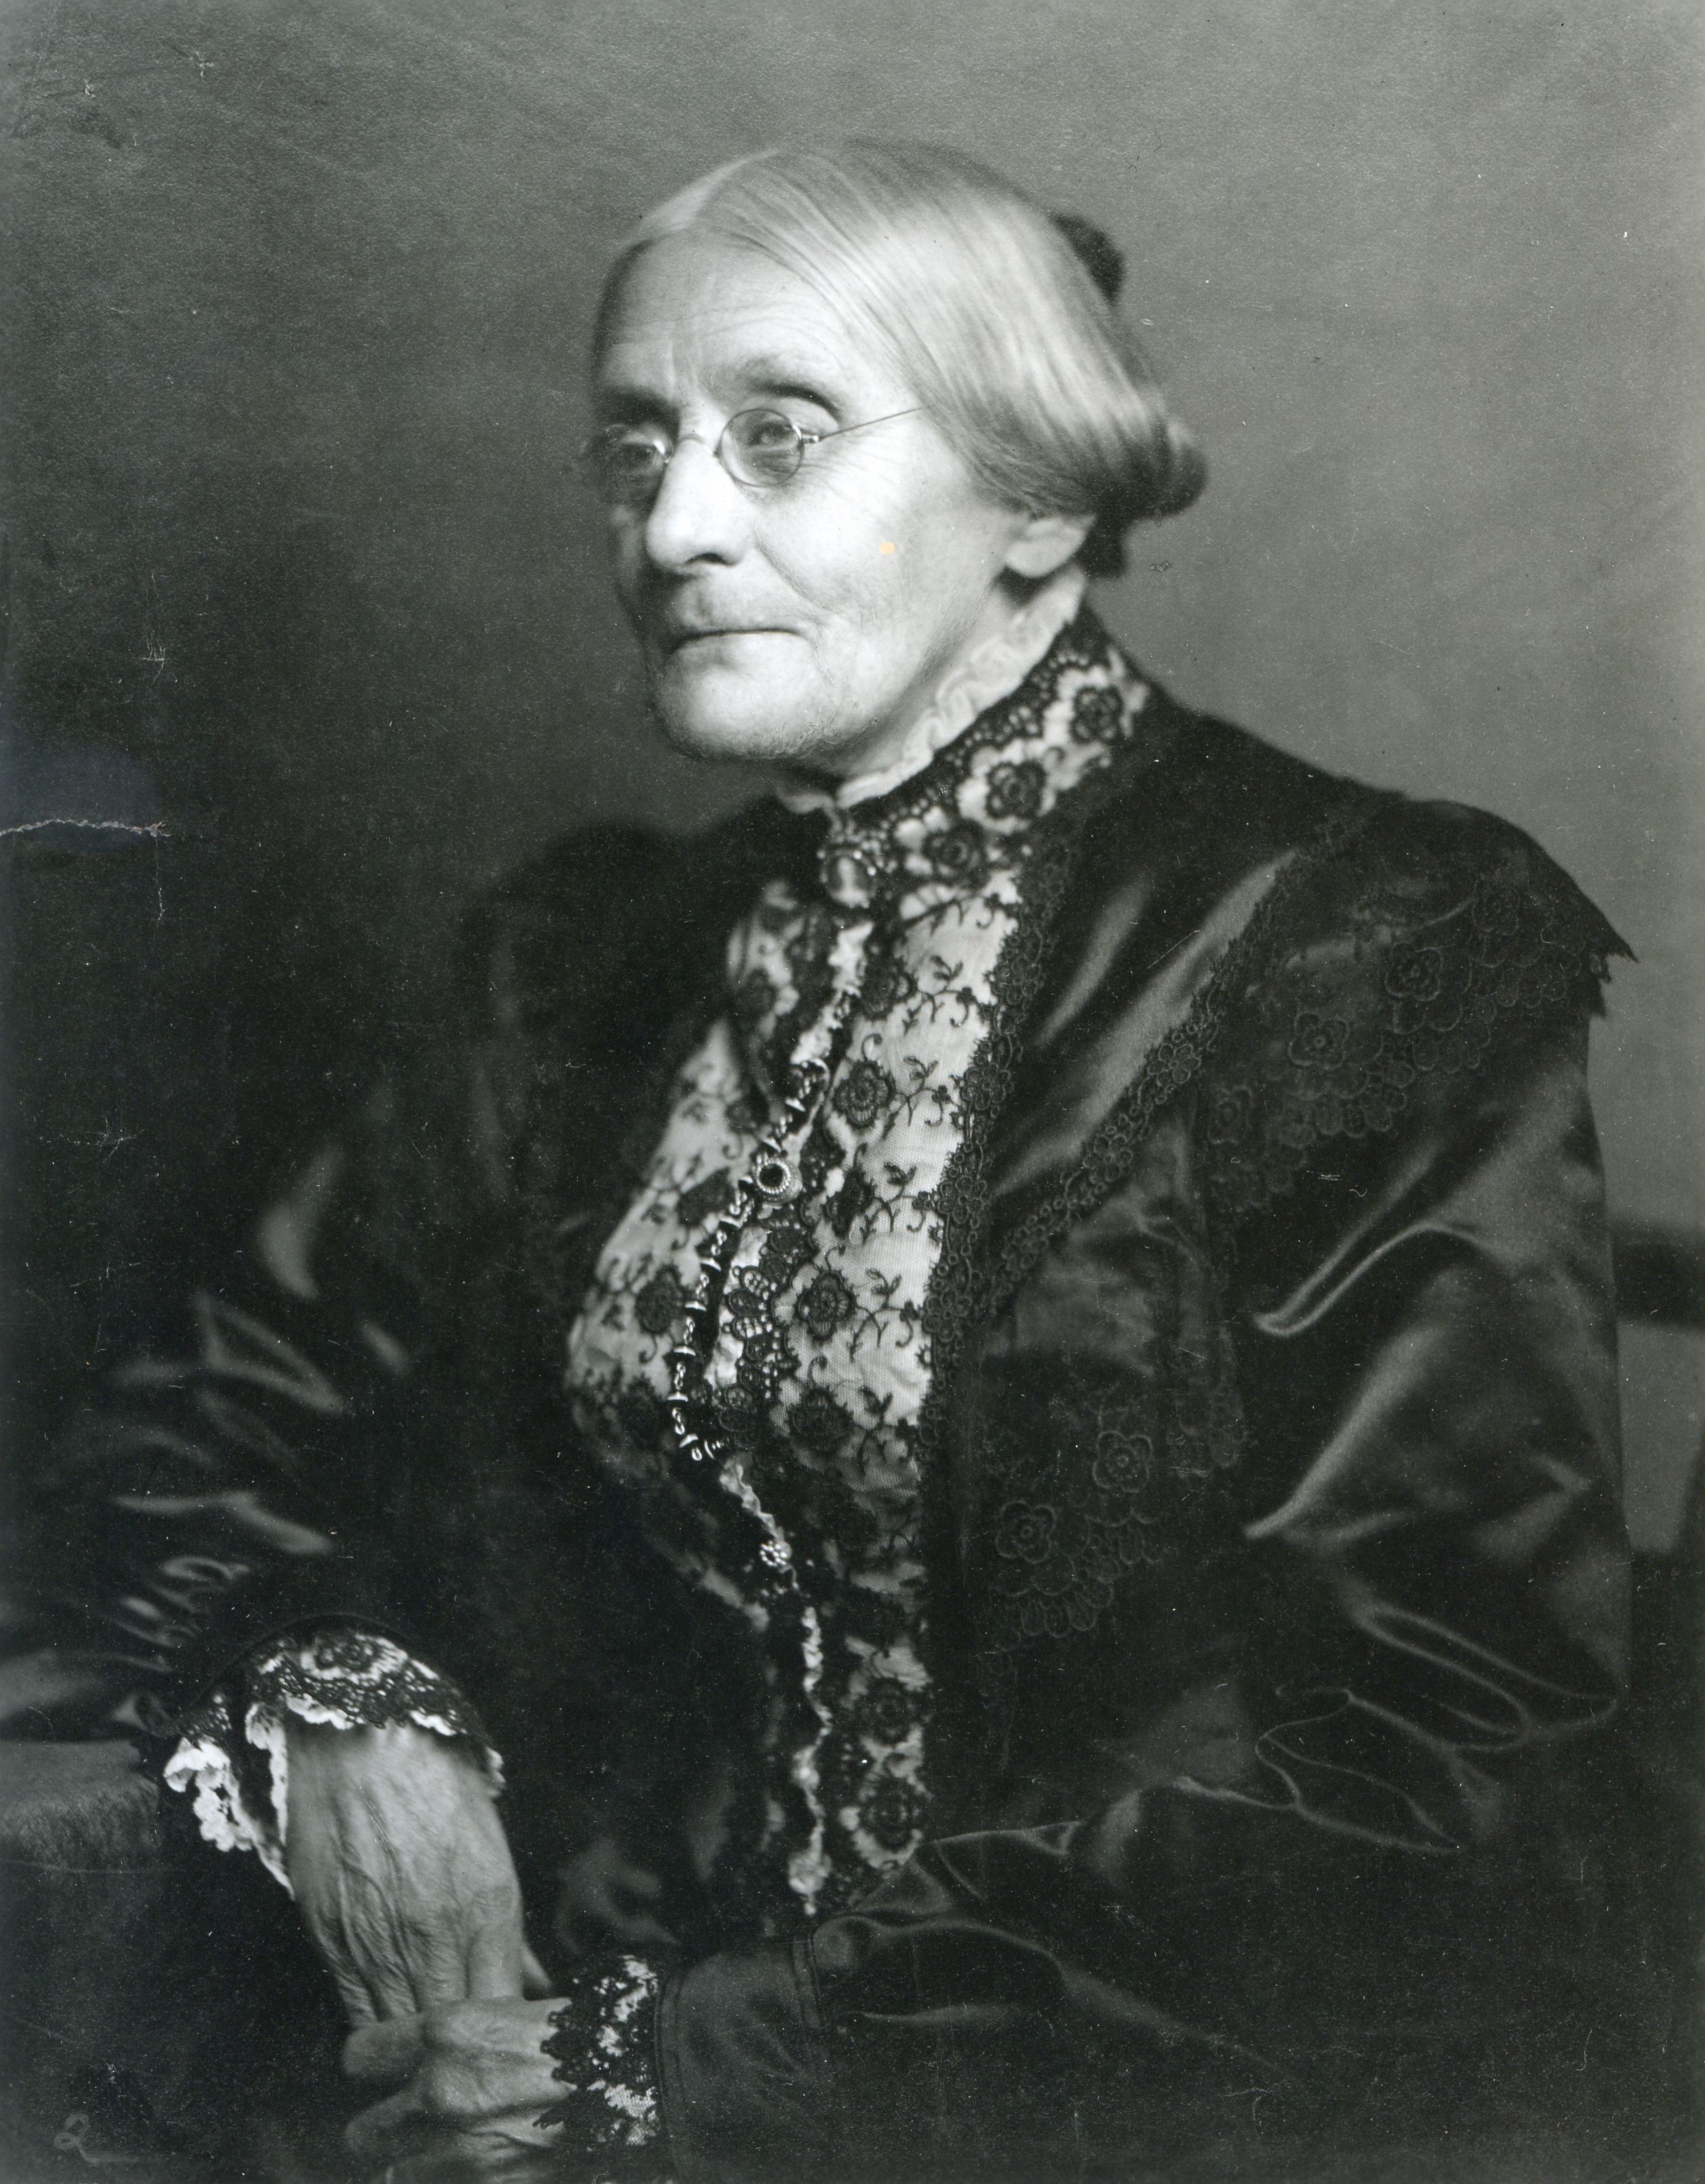 University acquires newly discovered collection of Susan B